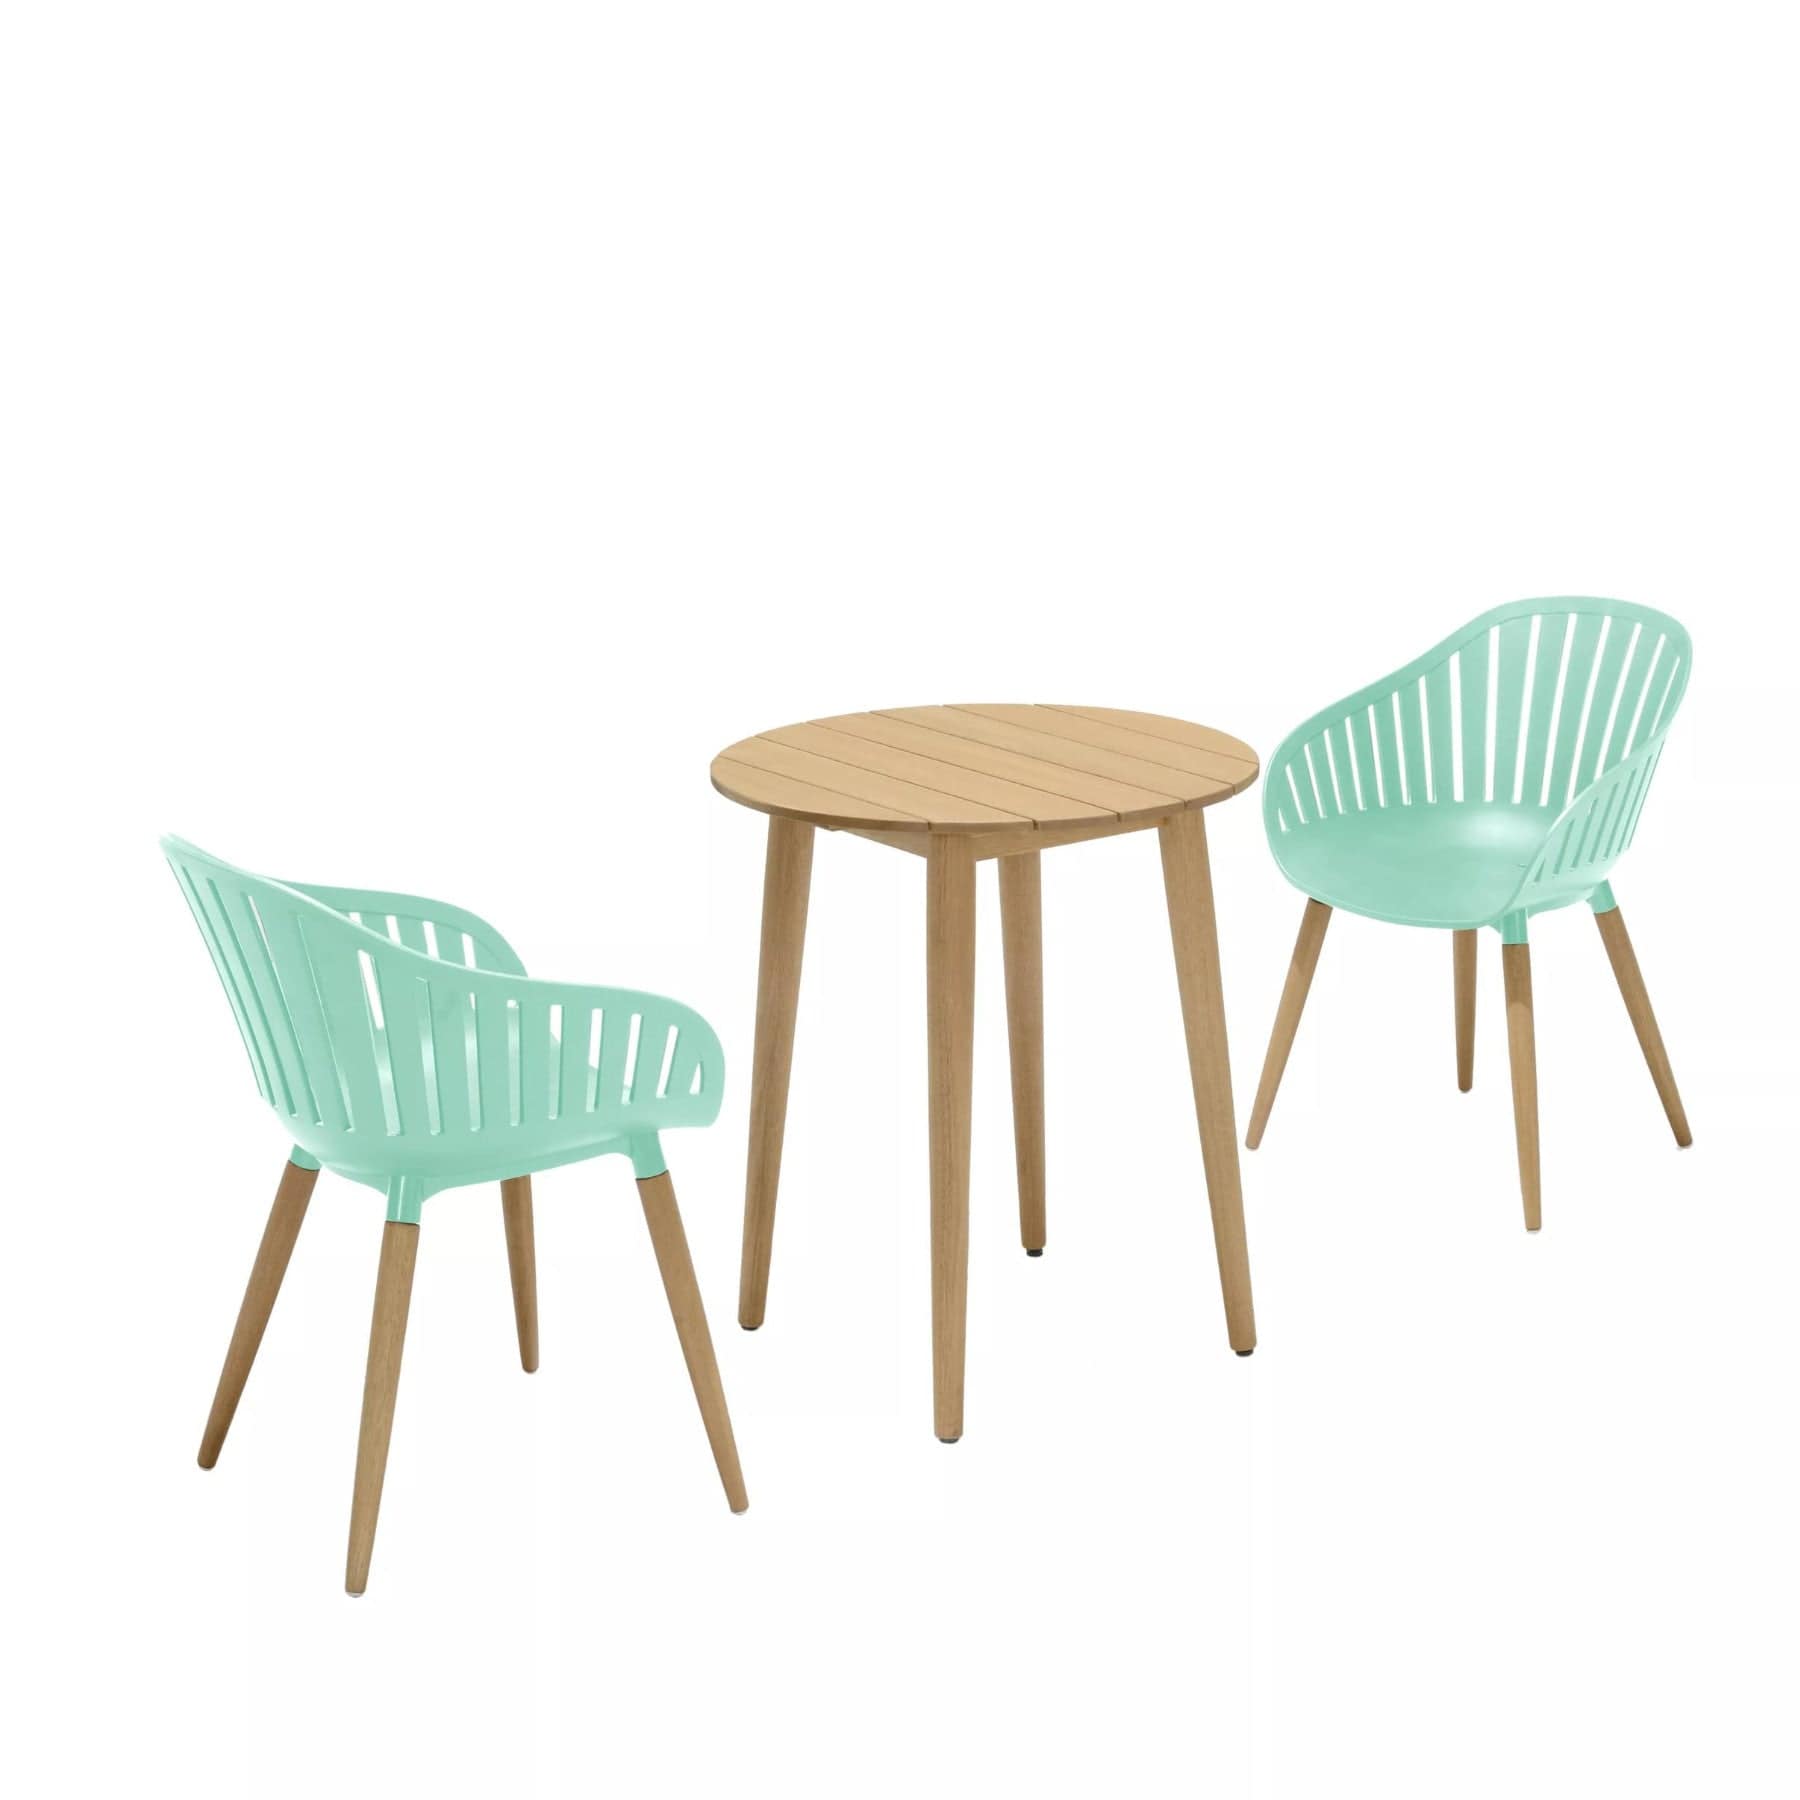 Modern minimalist outdoor furniture, two aqua blue plastic chairs with wooden legs and a round wooden table, Scandinavian design patio set, isolated on white background.